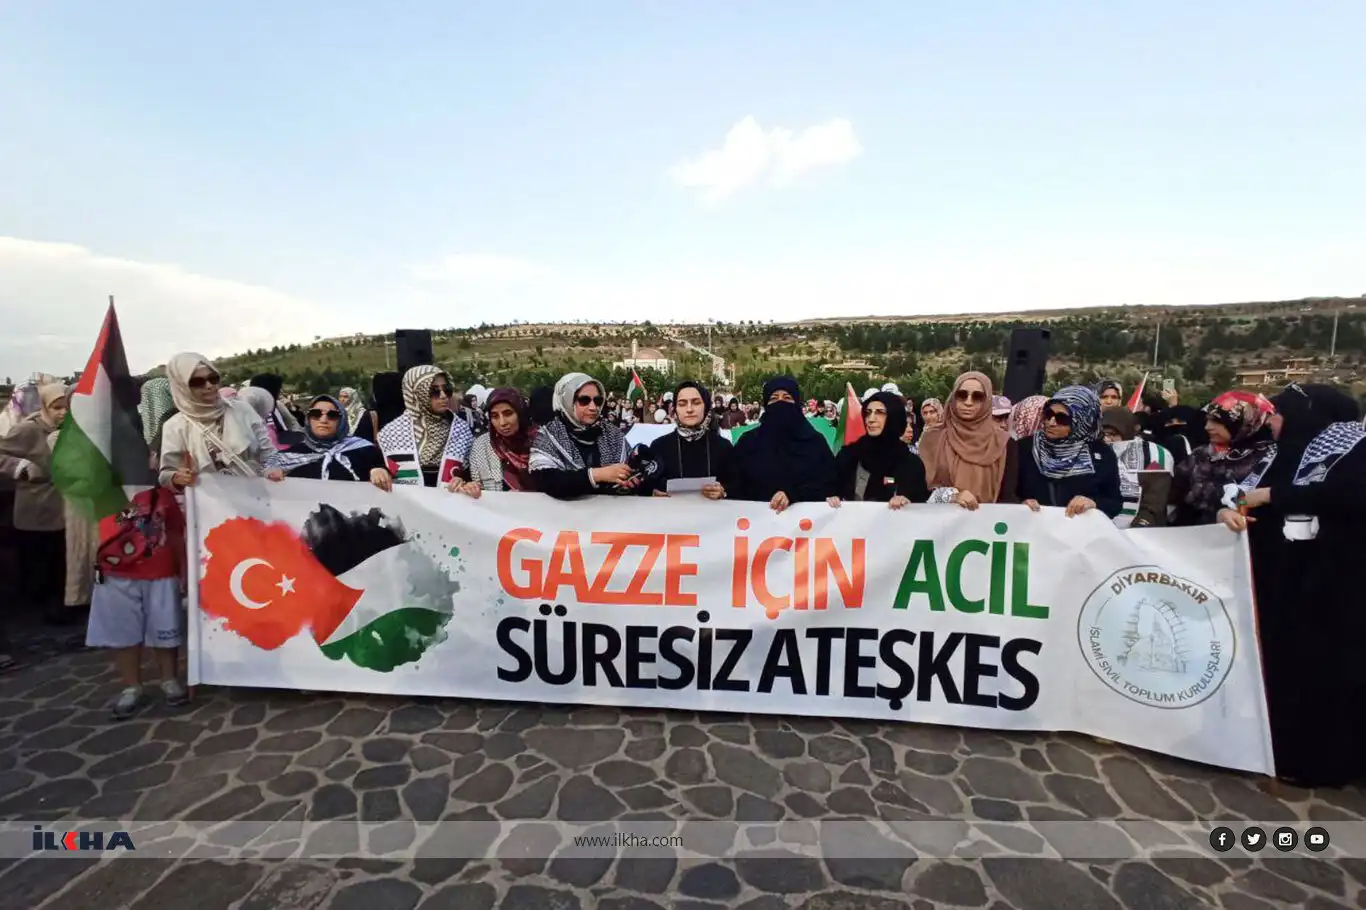 Women’s groups hold “Stop the Massacre” event in Diyarbakir to support Gaza